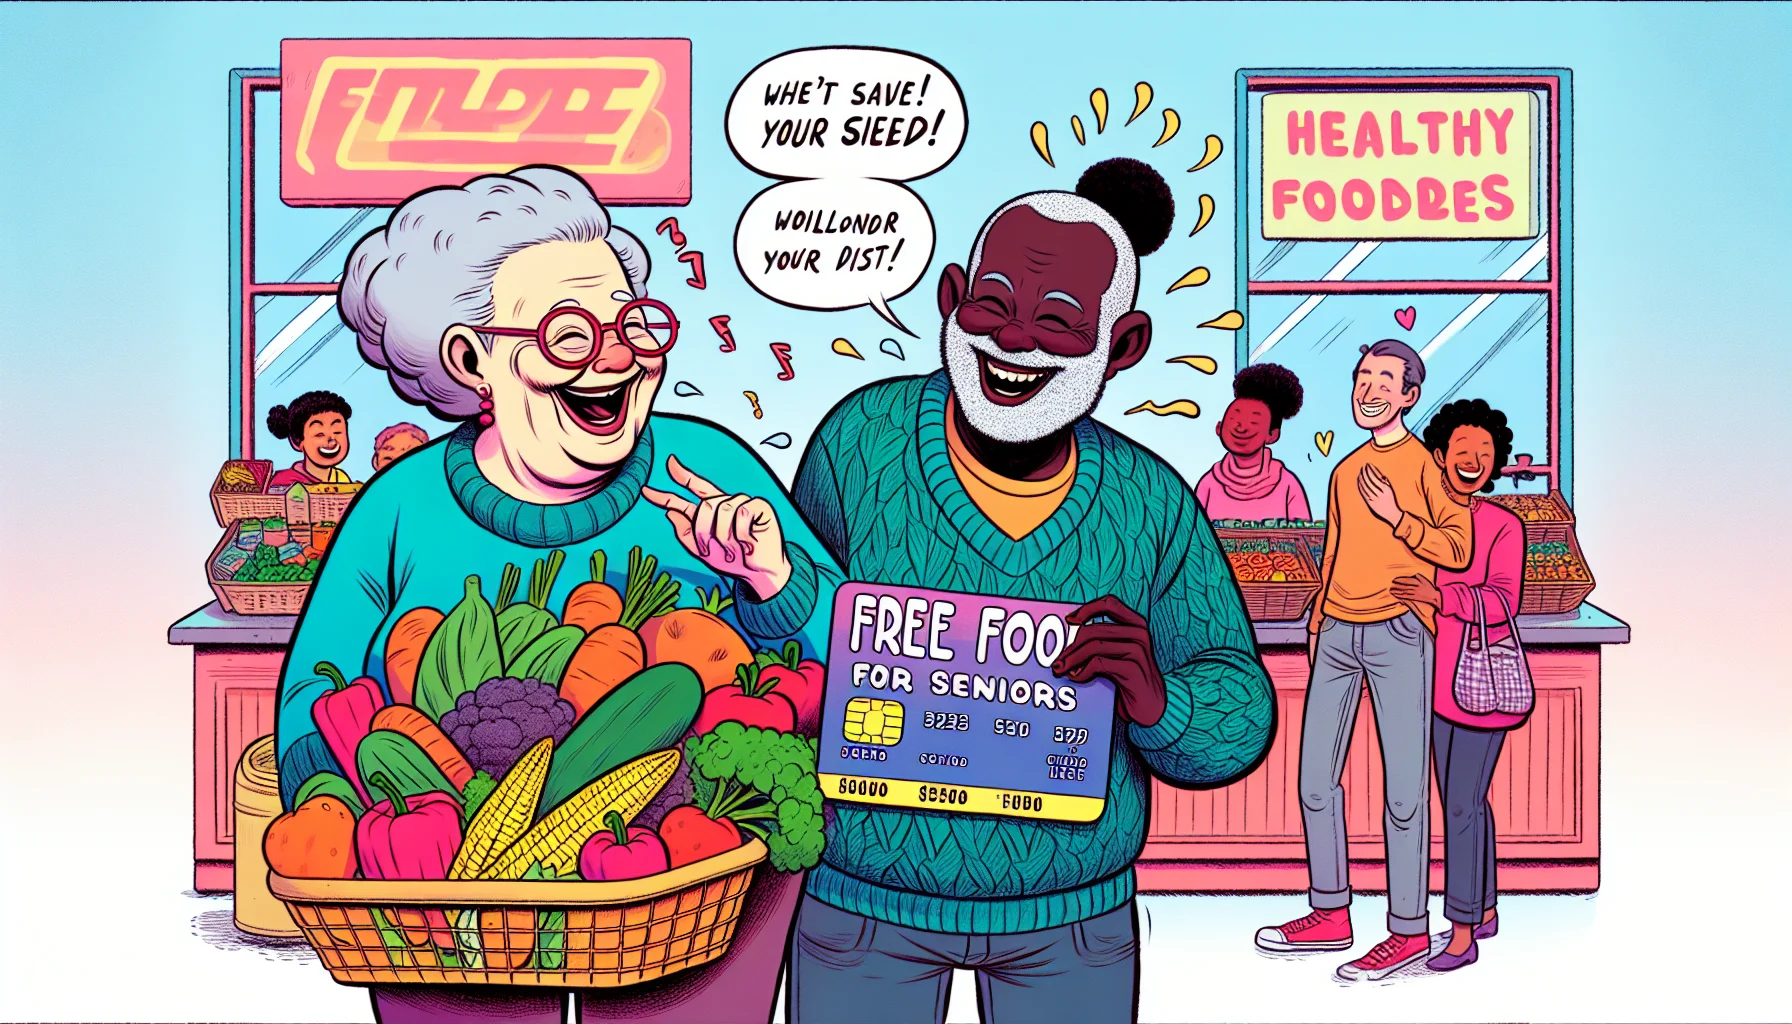 Imagine a vividly colored comic strip where two elderly individuals, one Caucasian woman and one Black man, are holding an oversized 'Free Food Card for Seniors'. They're laughing heartily, while standing in front of a large pile of vegetables and fruits that they've acquired. Their other hand is sneakily tucked behind their backs, concealing forbidden treats like chocolates and cookies. The backdrop is a friendly neighborhood supermarket, bustling with diverse people who look curious and amused. Puns about healthy eating and getting old are sprinkled throughout the scene.